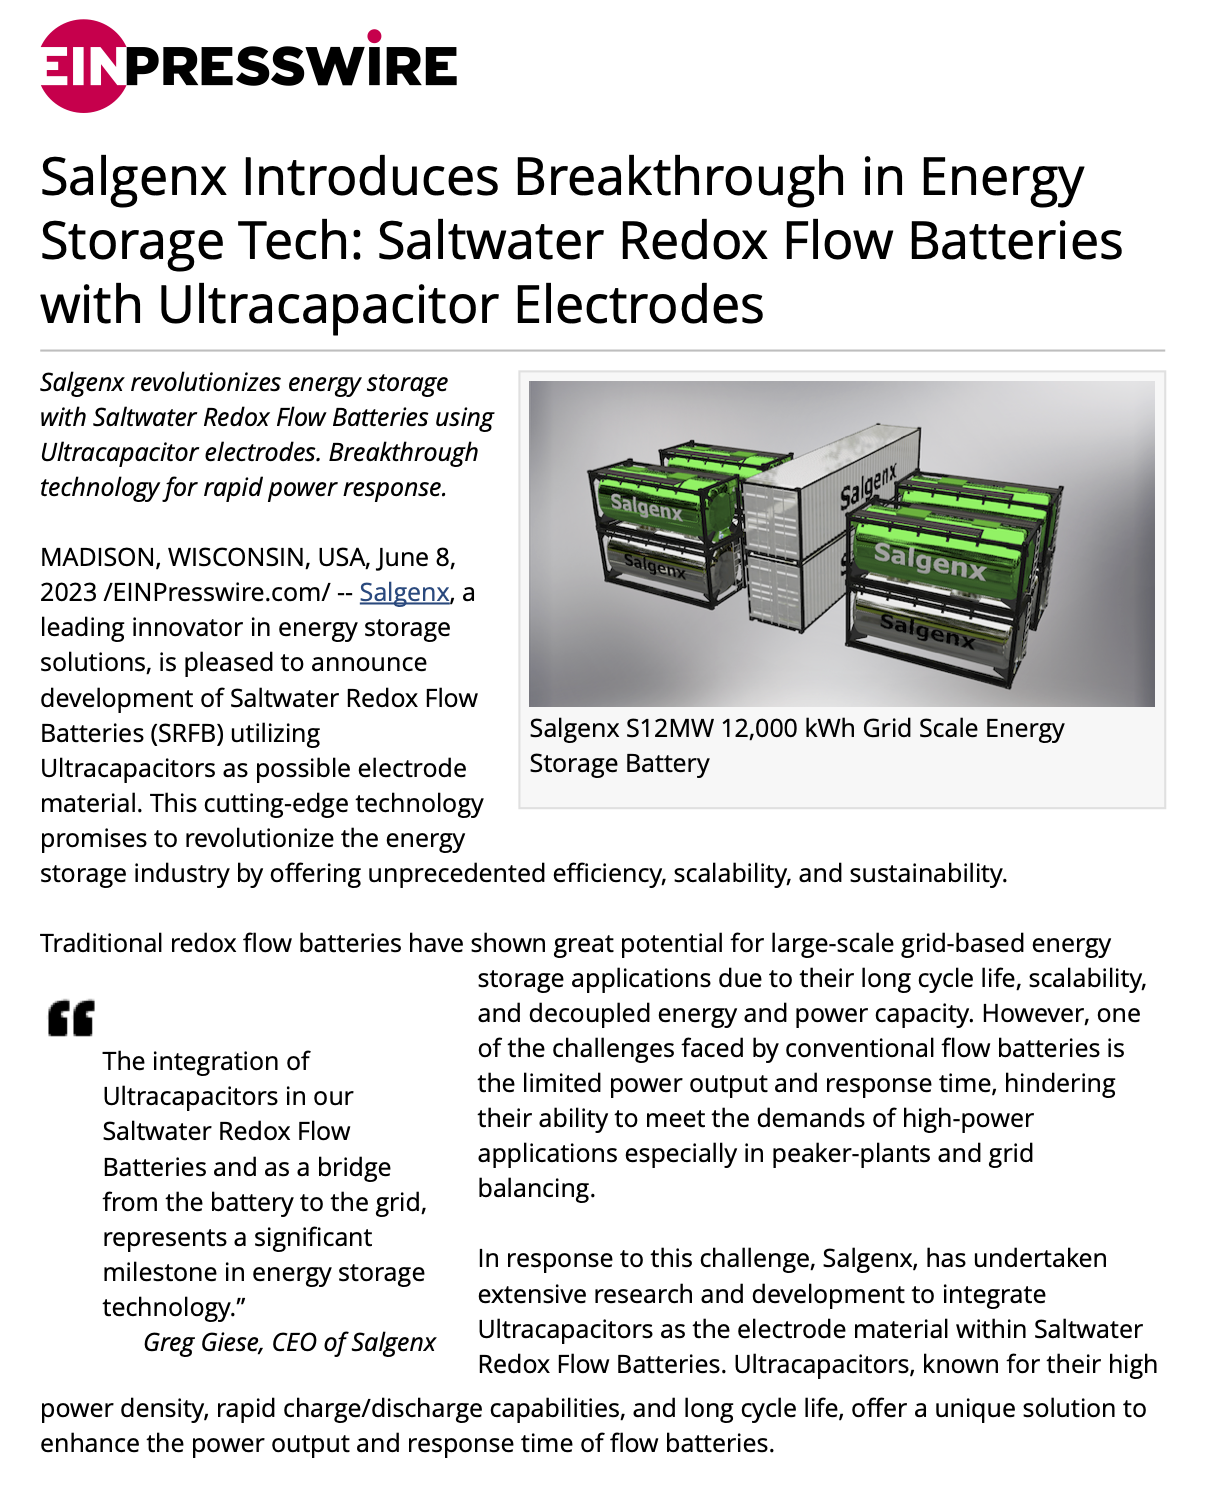 Salgenx Introduces Breakthrough in Energy Storage Tech: Saltwater Redox Flow Batteries with Ultracapacitor Electrodes